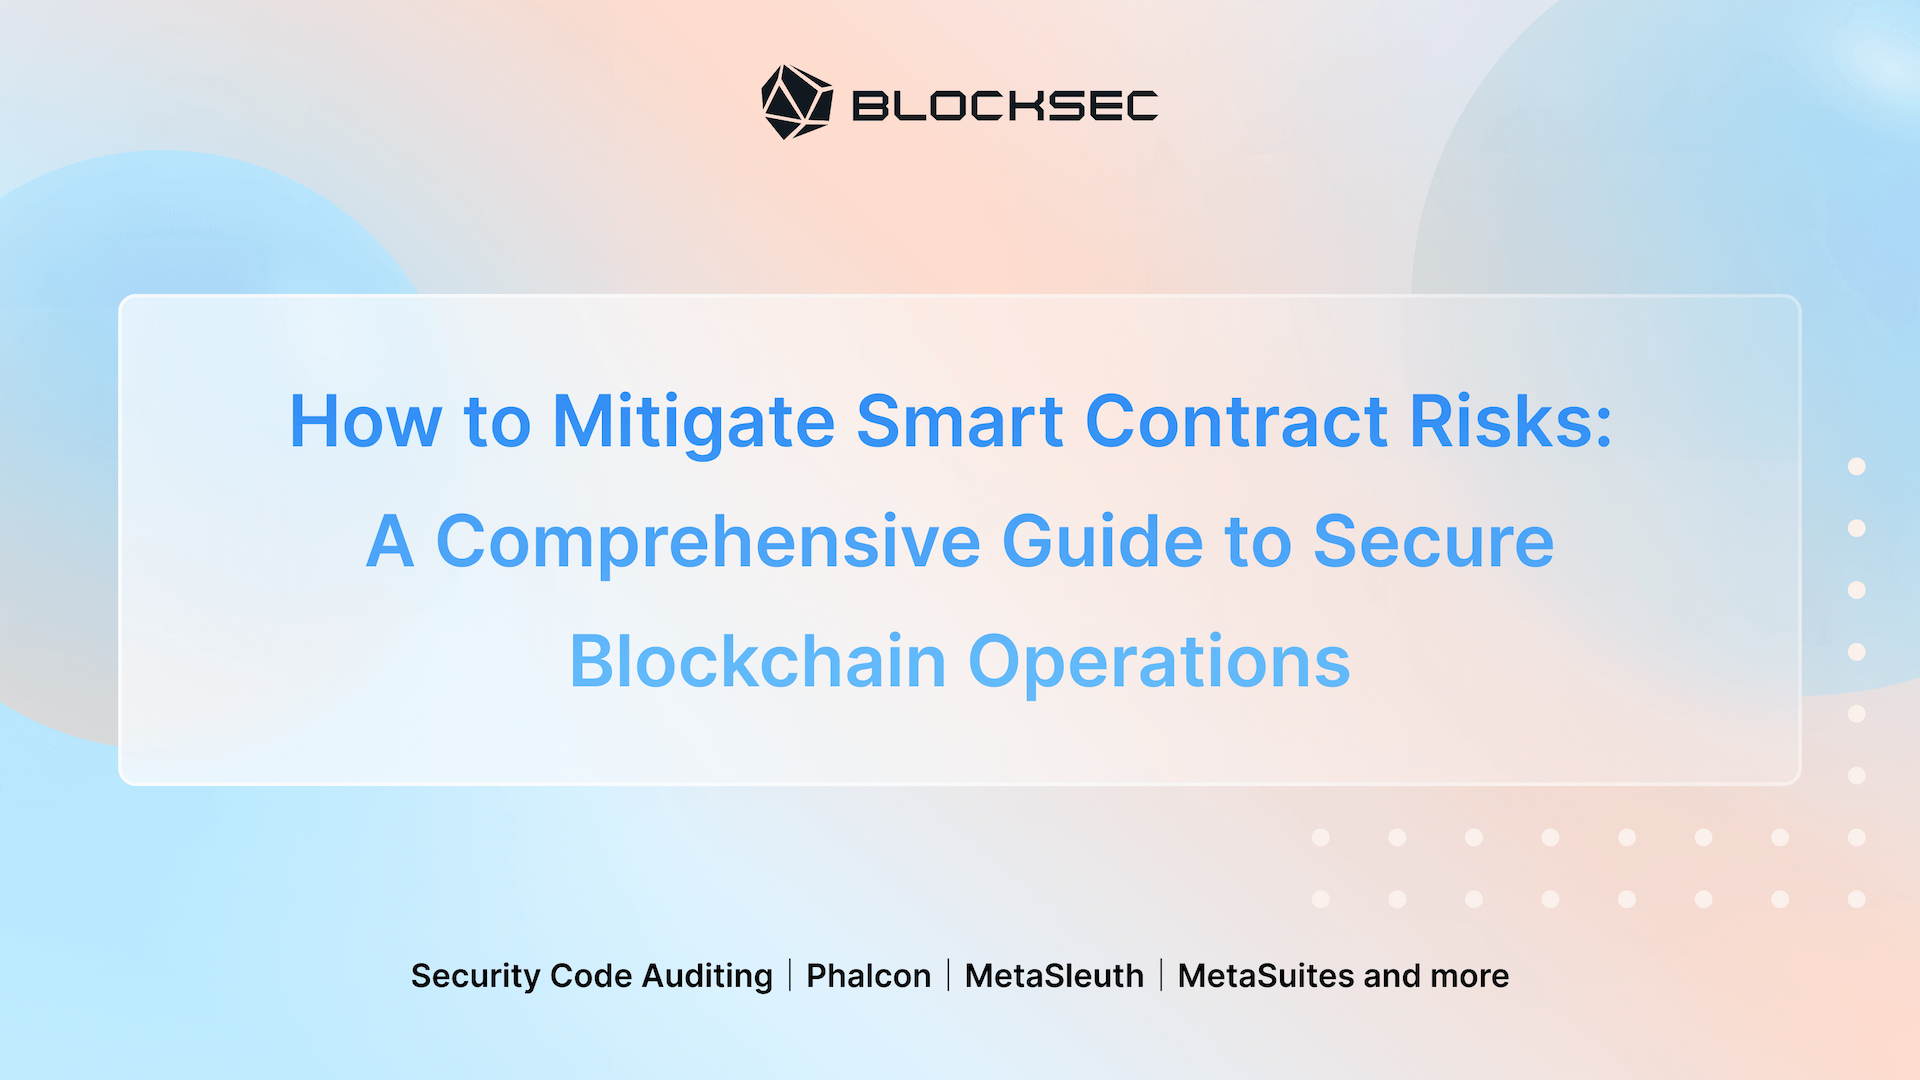 How to Mitigate Smart Contract Risks: A Comprehensive Guide to Secure Blockchain Operations